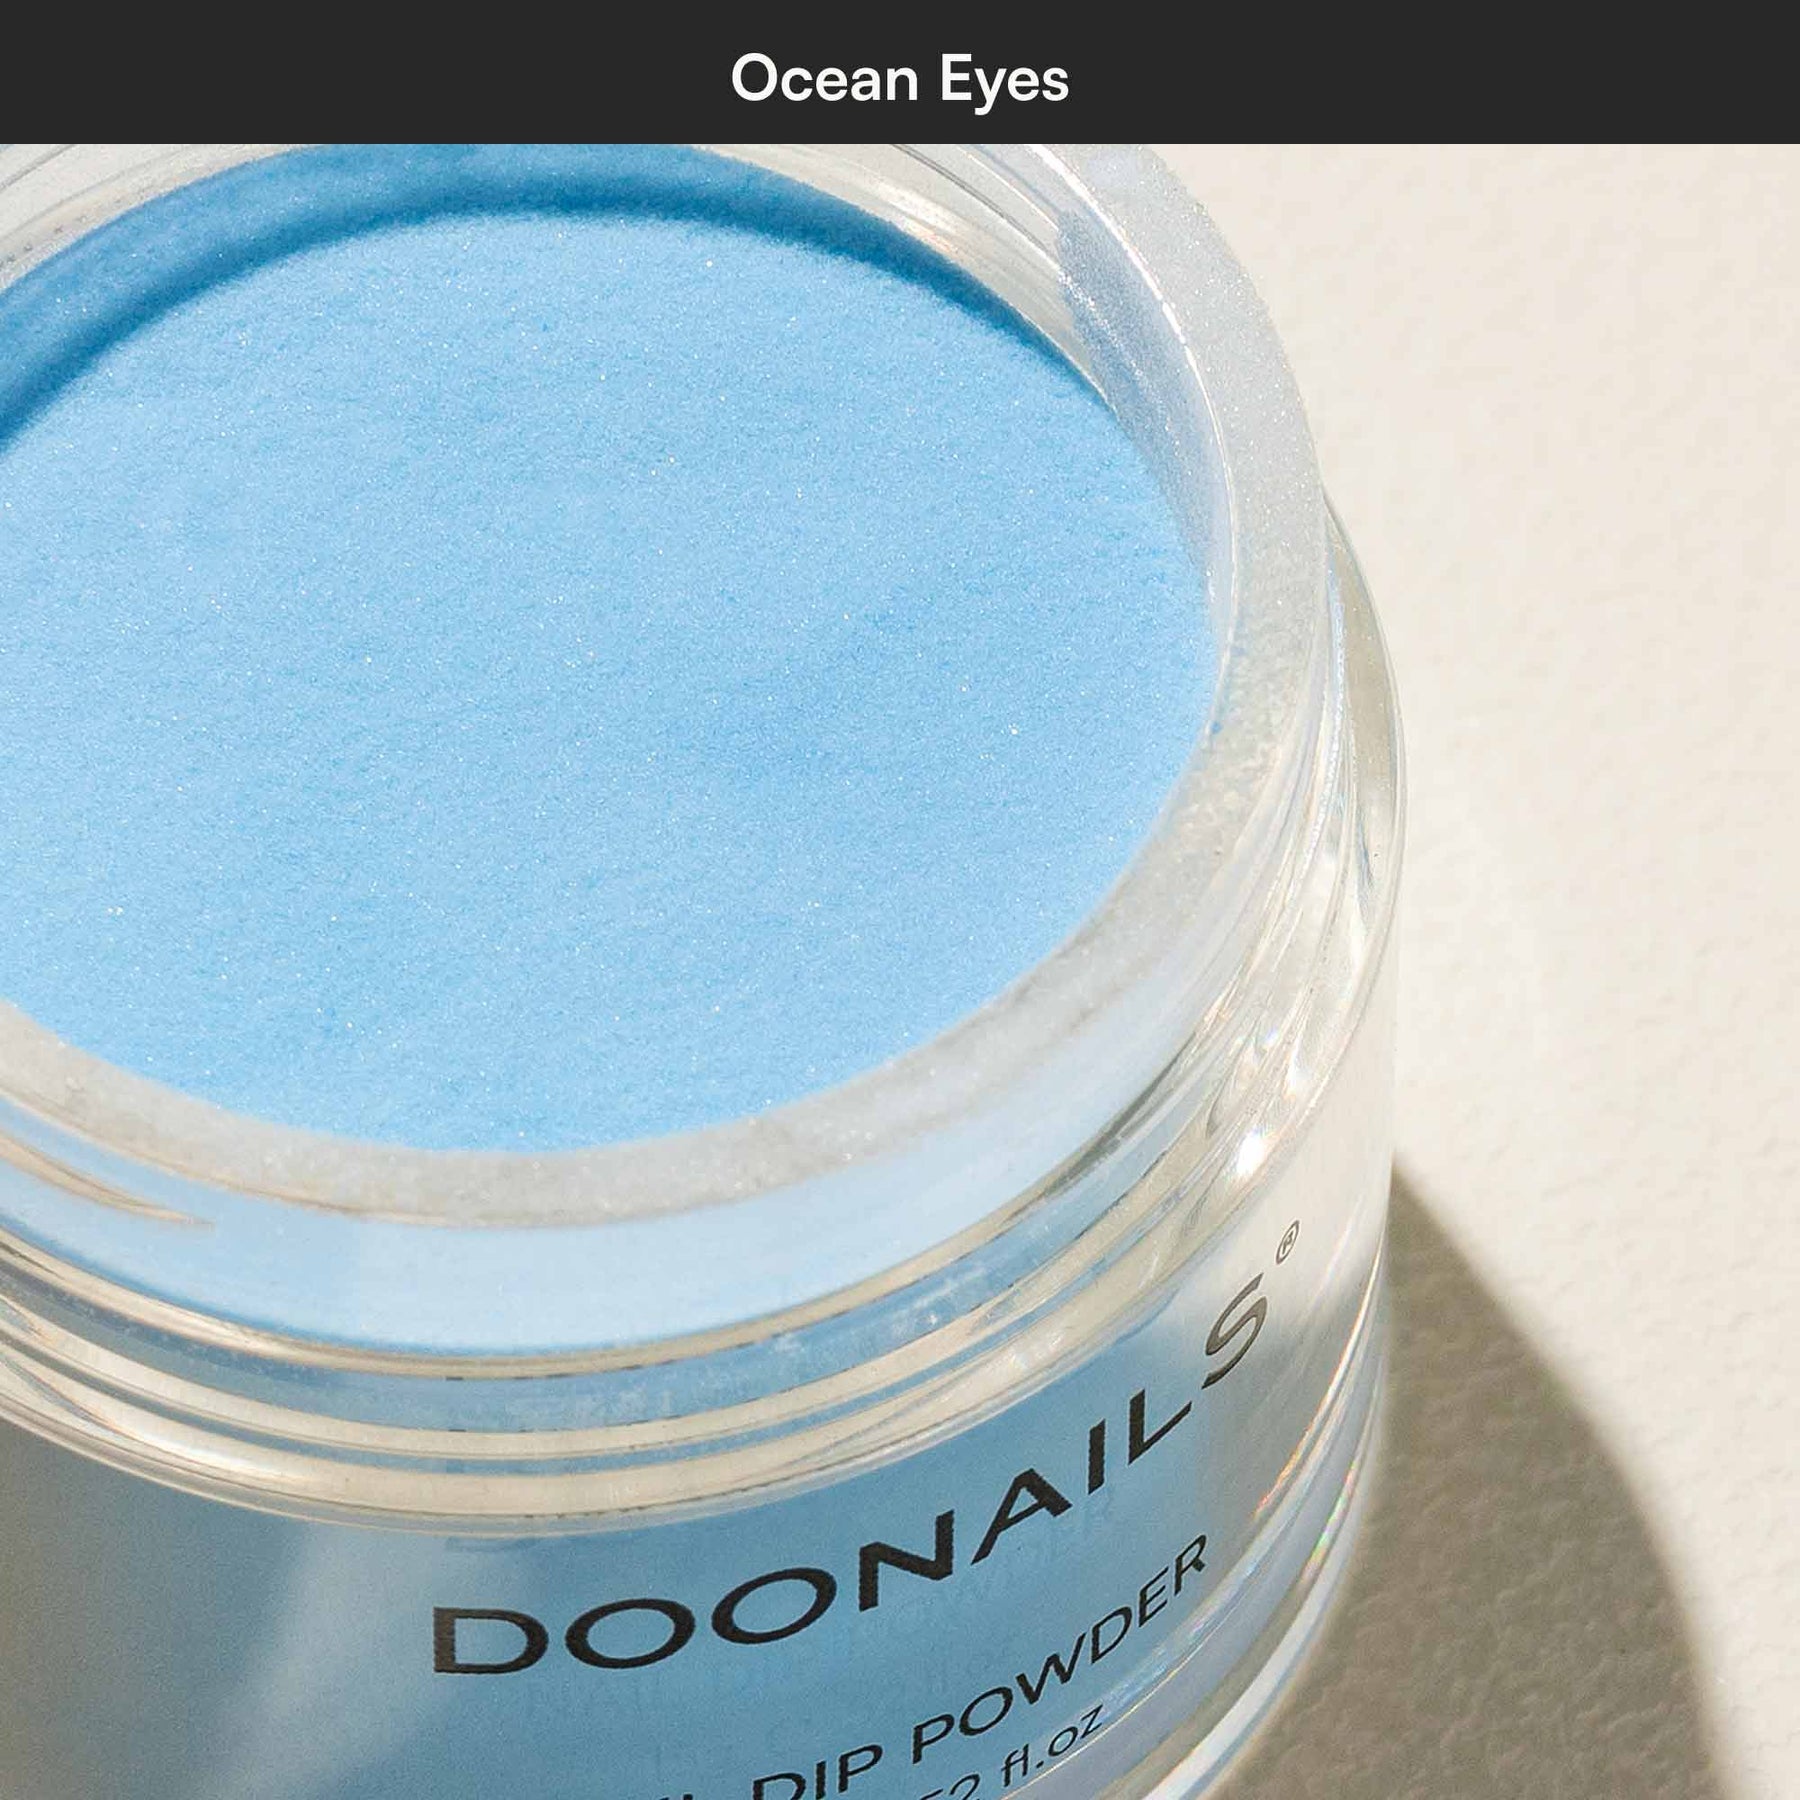 4. Doonails Limited Edition